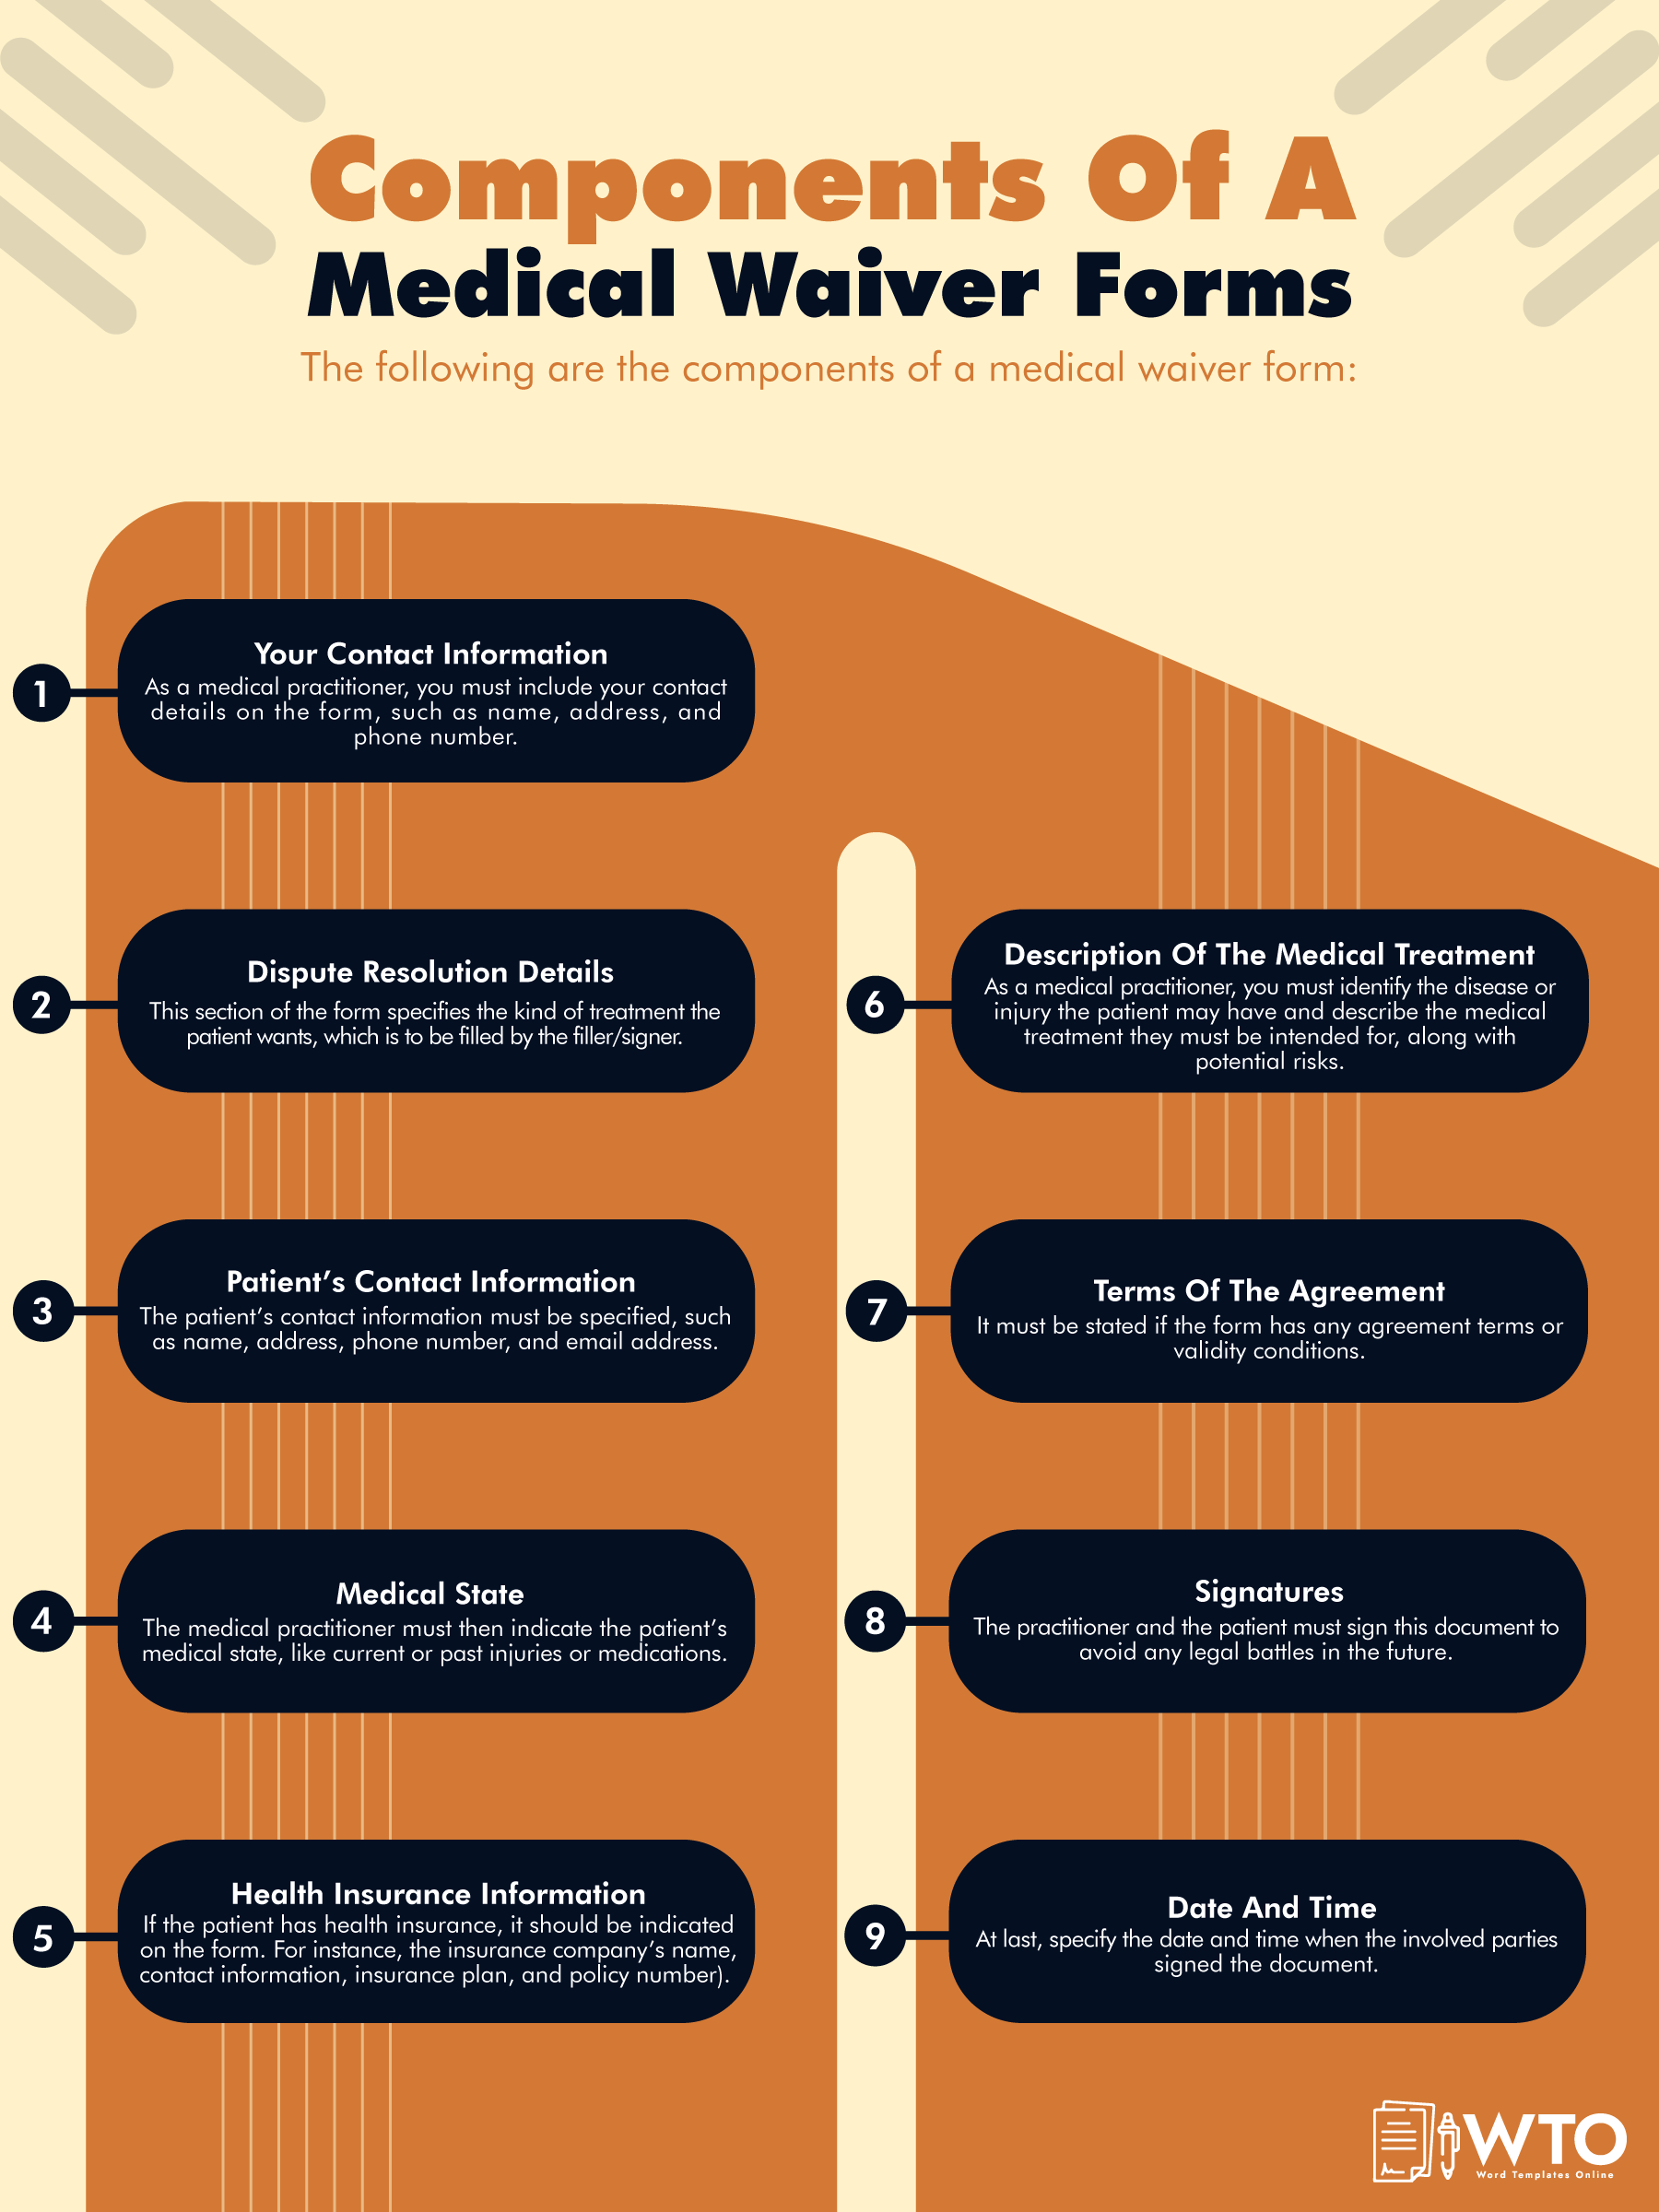 This infographic contains the components of a medical waiver form.